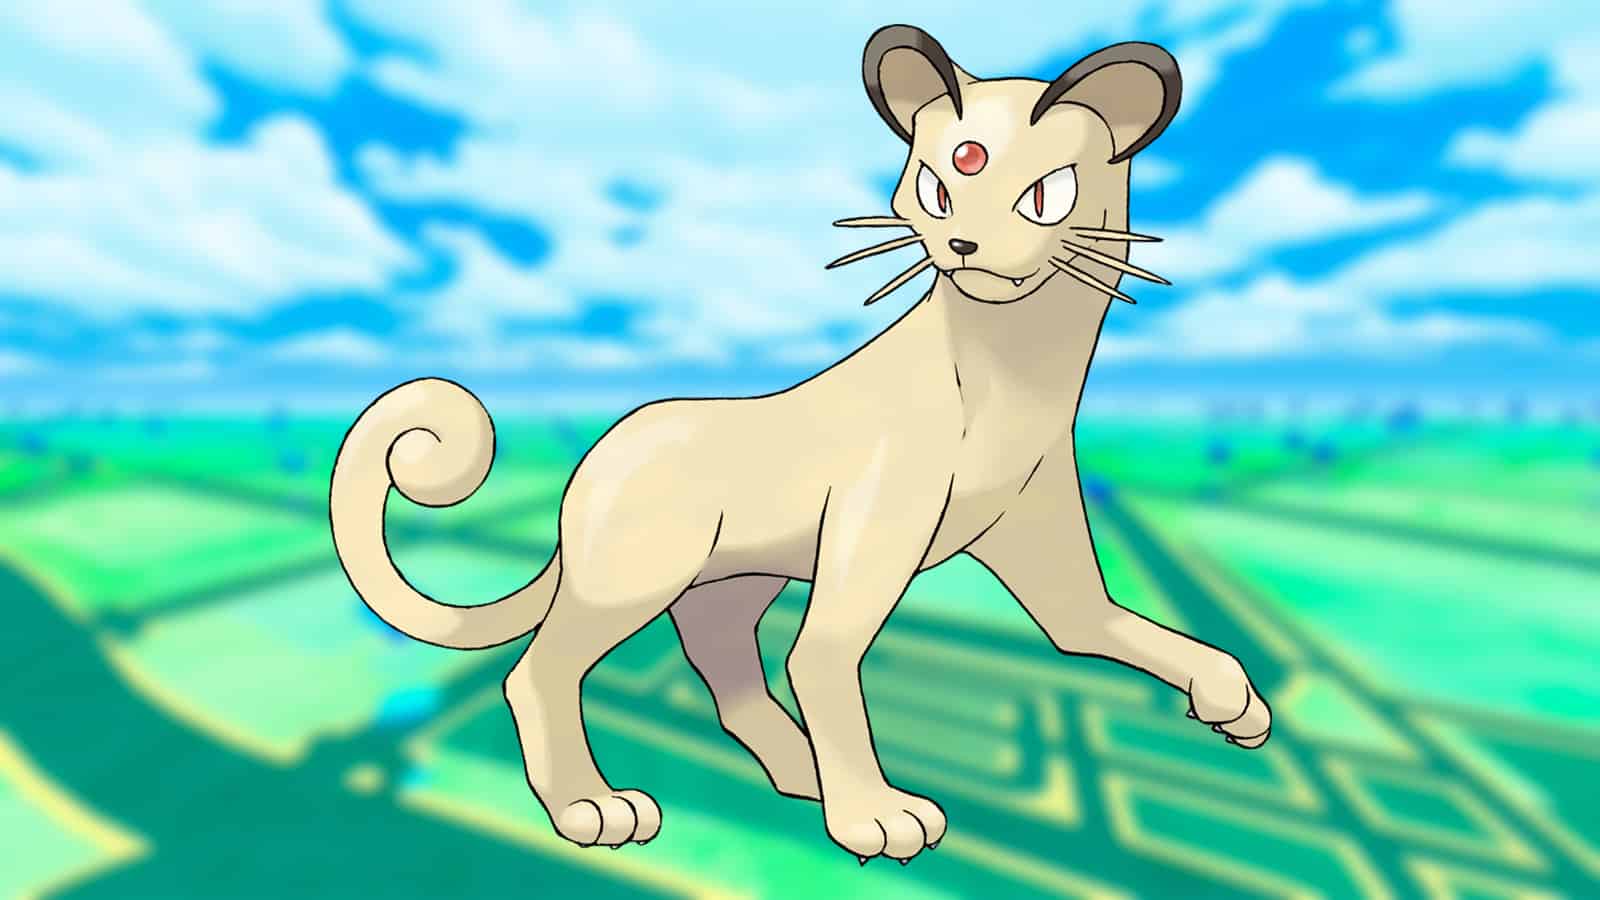 Persian, one of Giovanni's phase in Pokemon Go